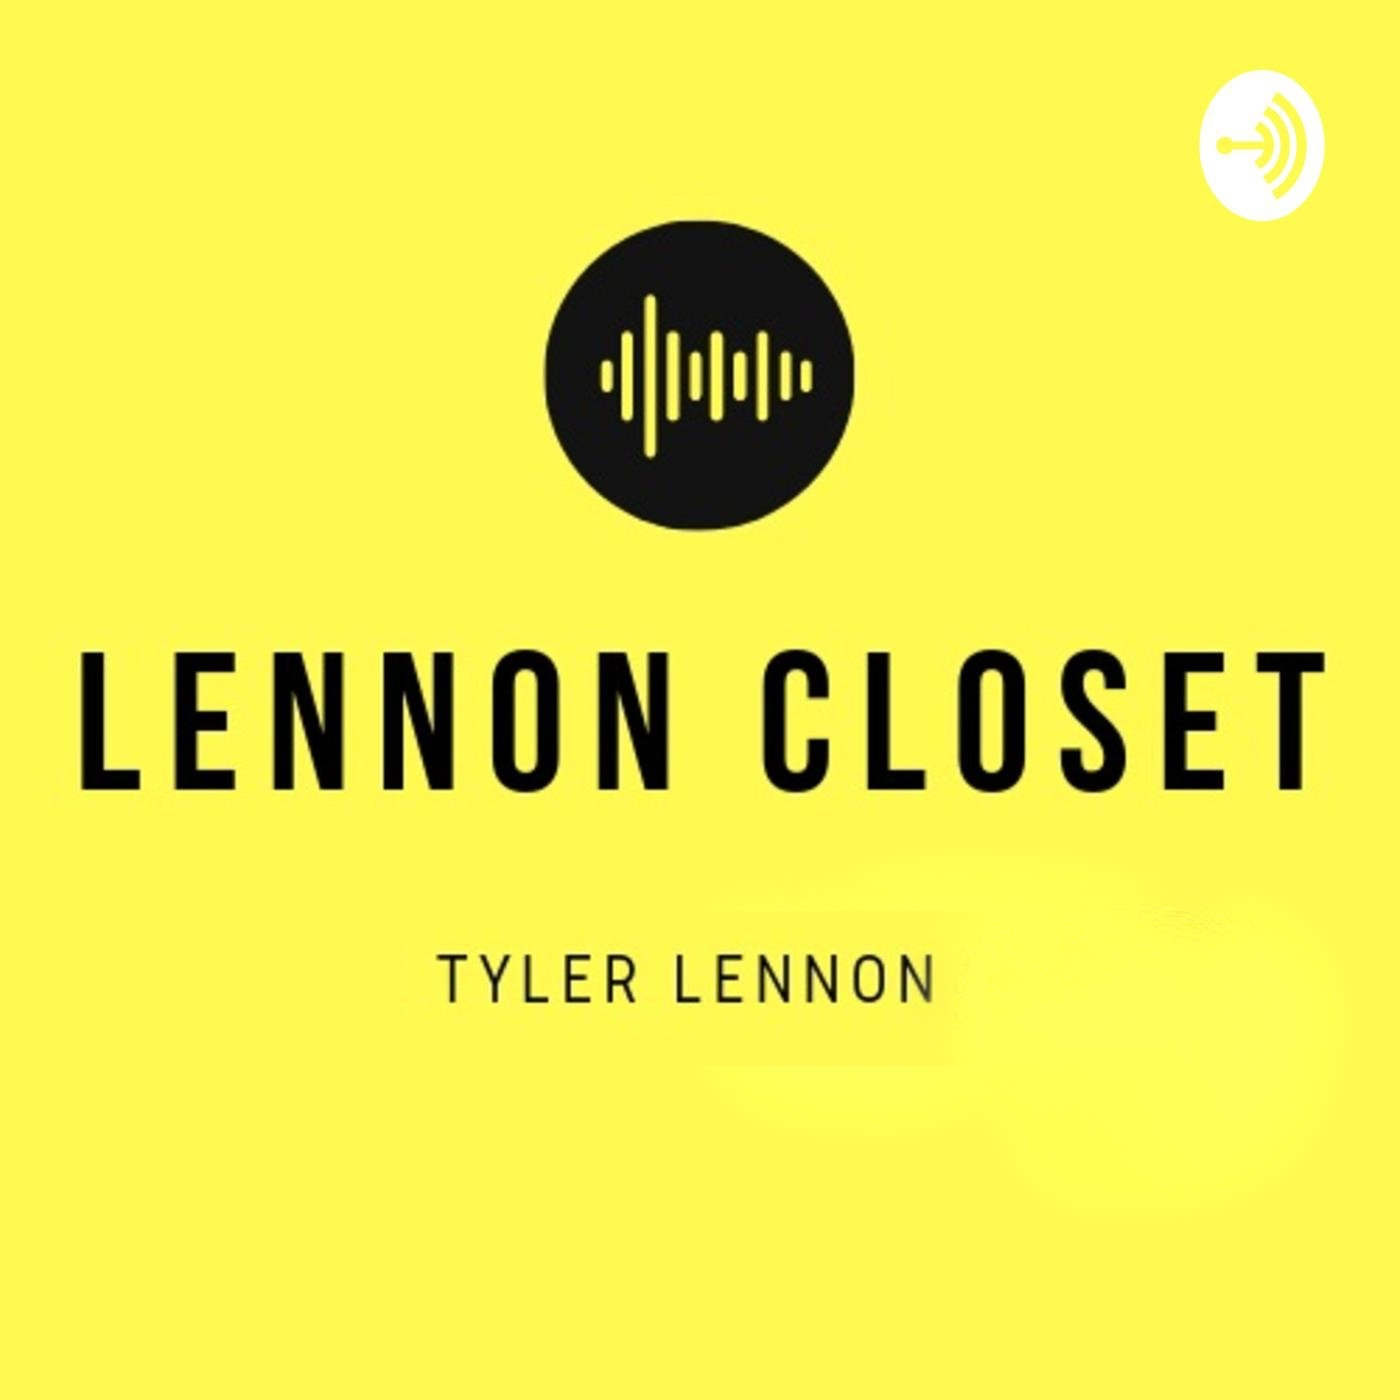 The Lennon Closet Podcast, with Mike Bibbins